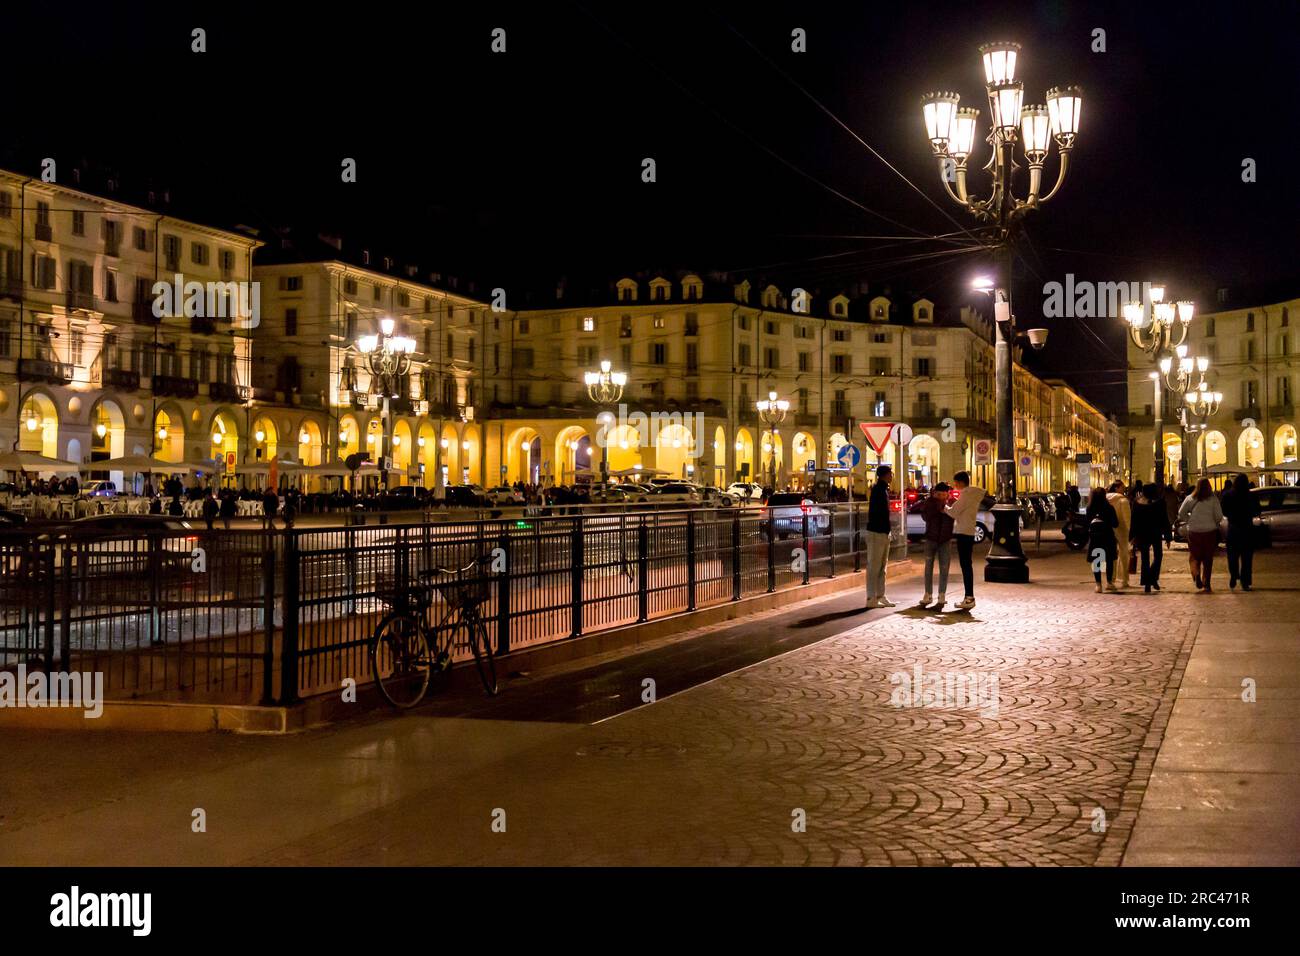 Turin, Italy - March 27, 2022: Piazza Vittorio Veneto, also known as Piazza Vittorio, is a city square in Turin, Italy, which takes its name from the Stock Photo